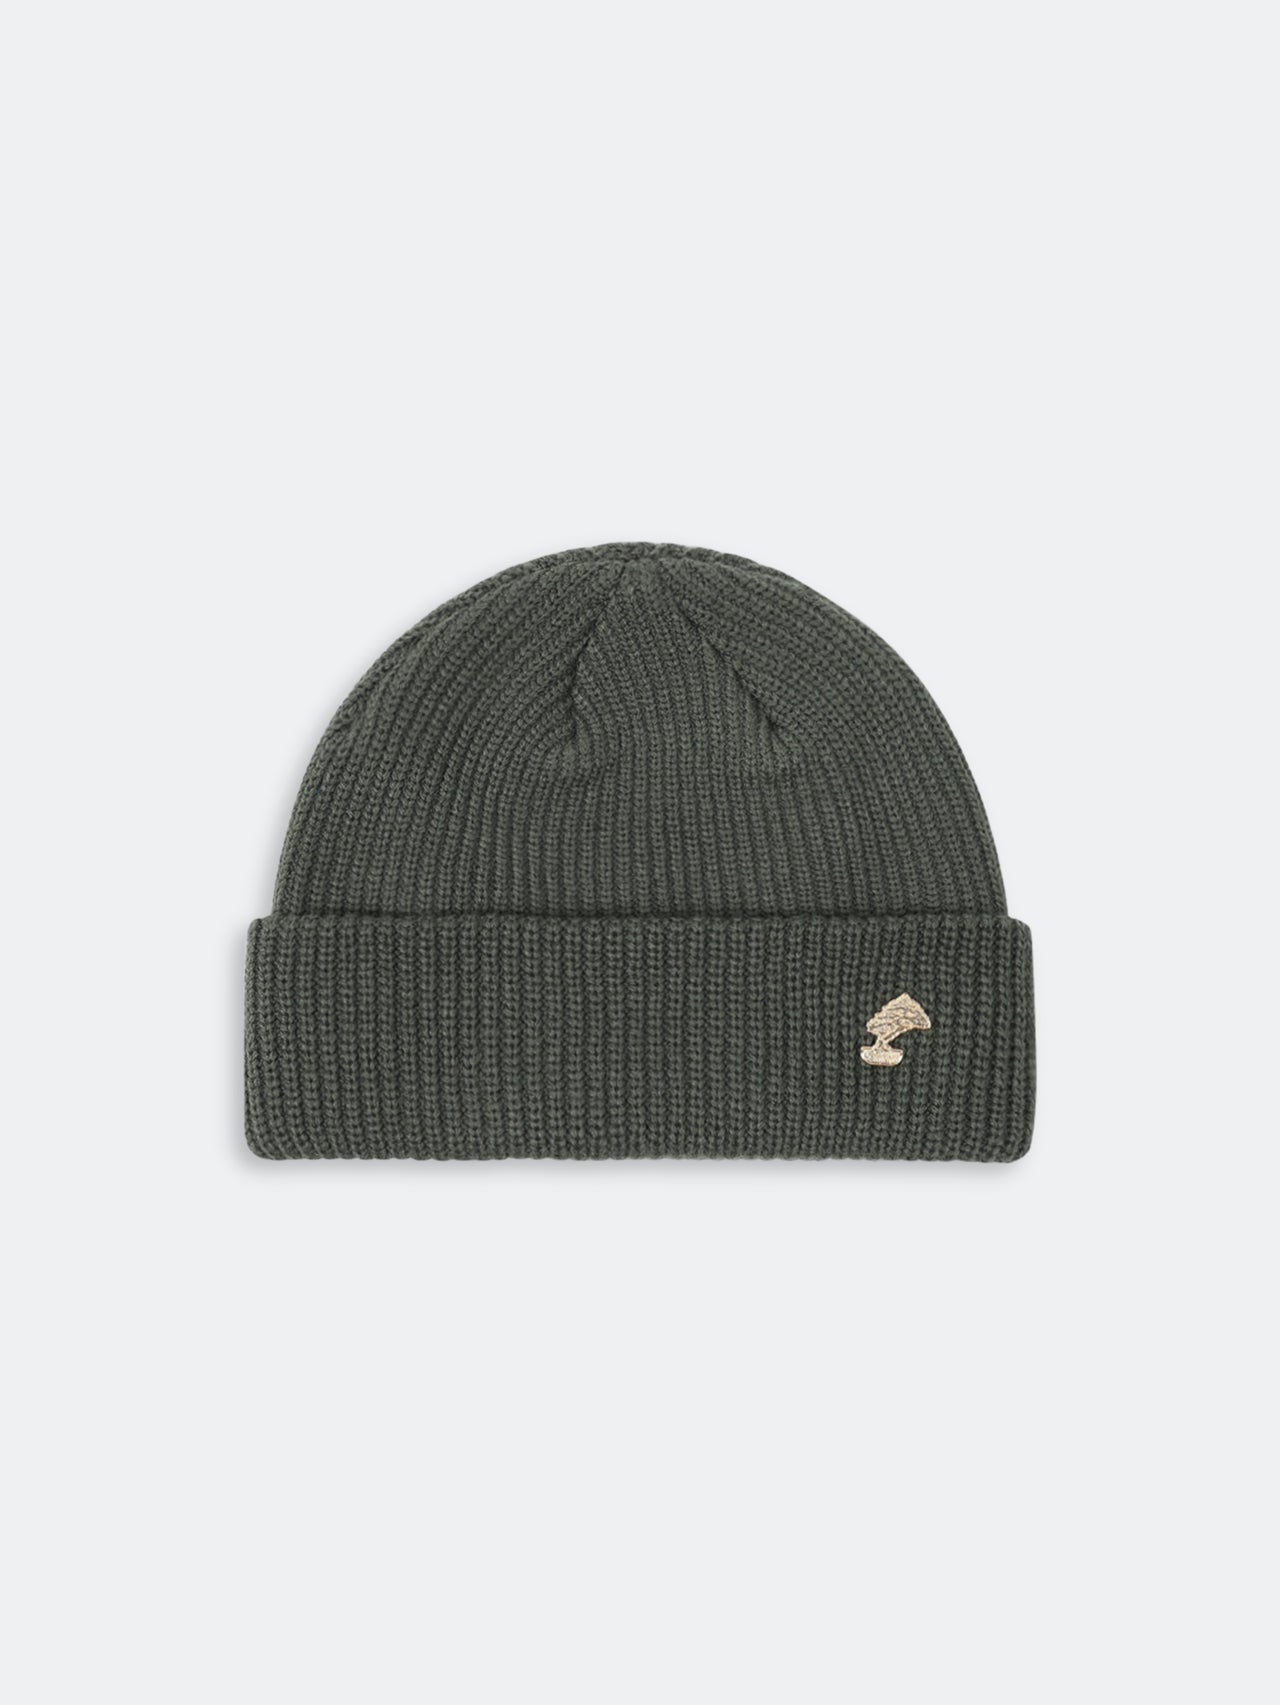 CABLE KNIT BEANIE - OLIVE